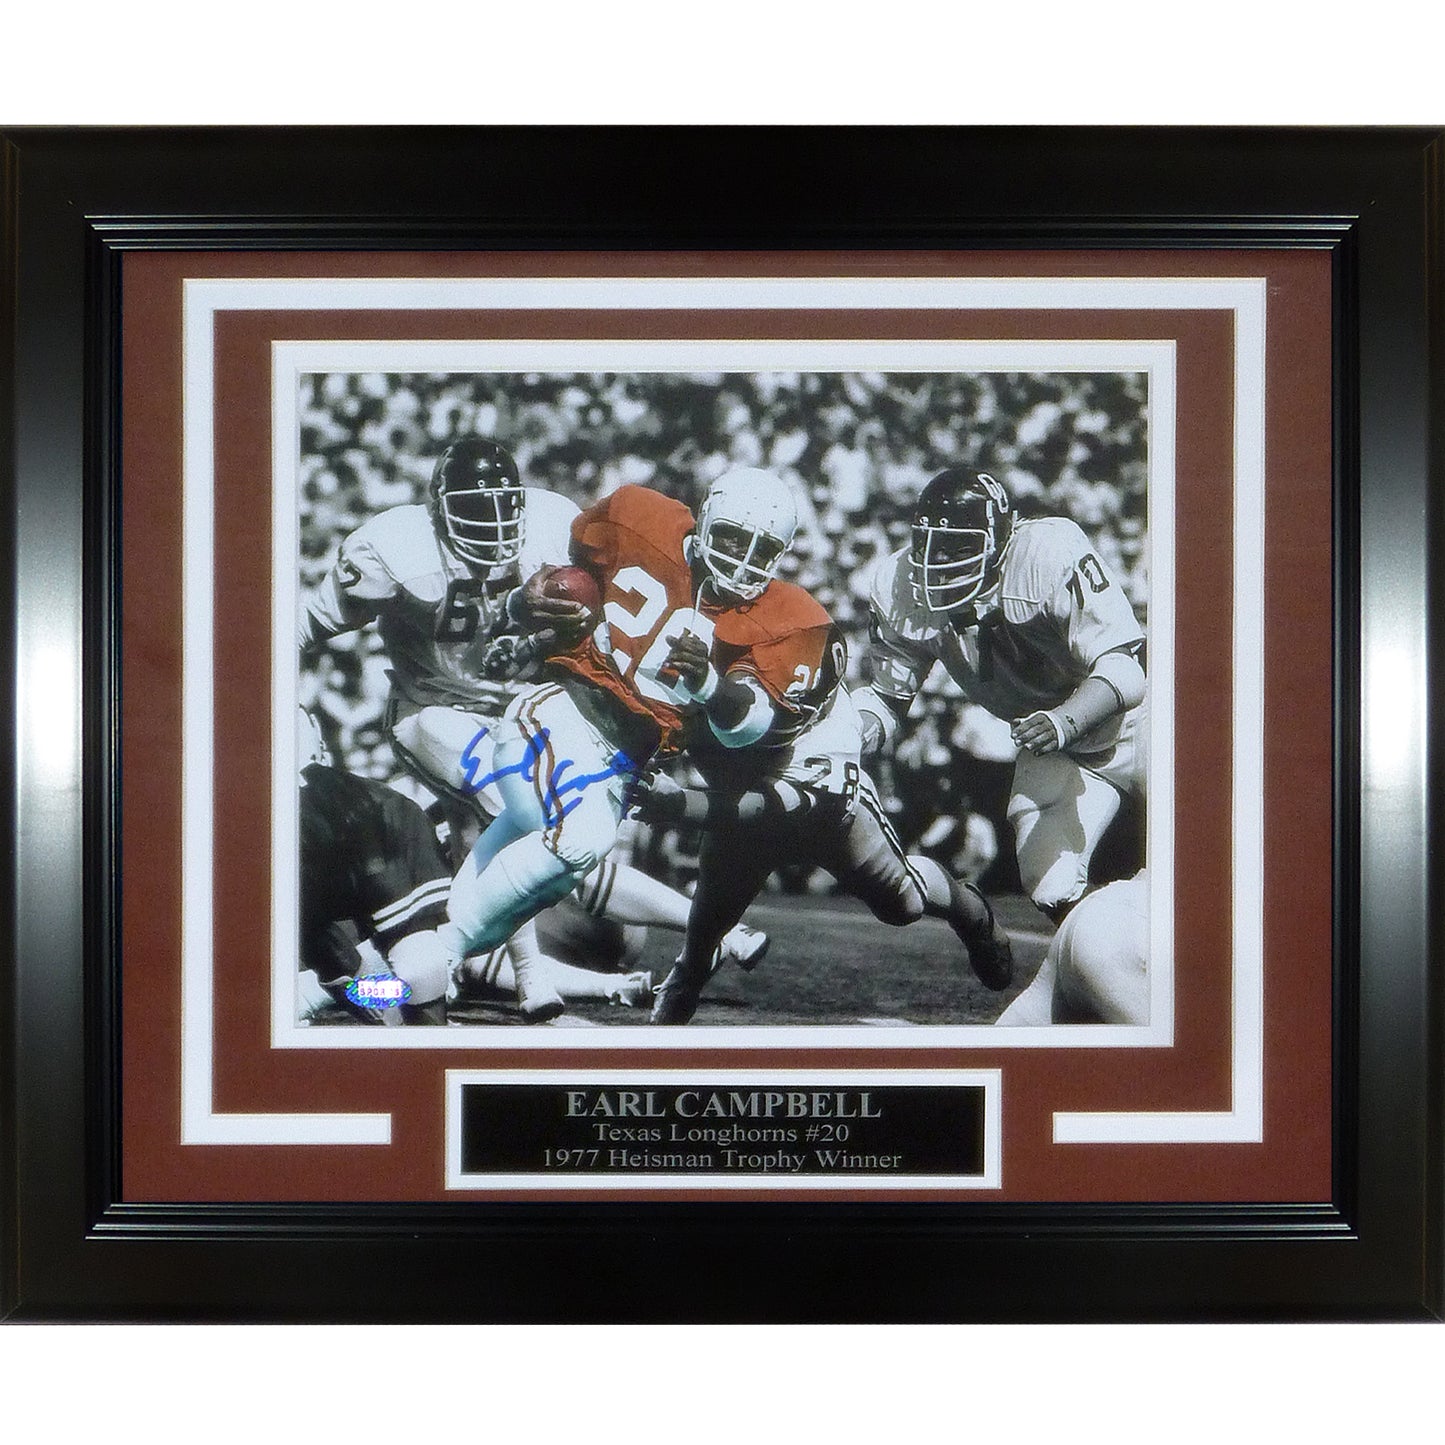 Earl Campbell Autographed Texas Longhorns (Horiz) Deluxe Framed 8x10 Photo